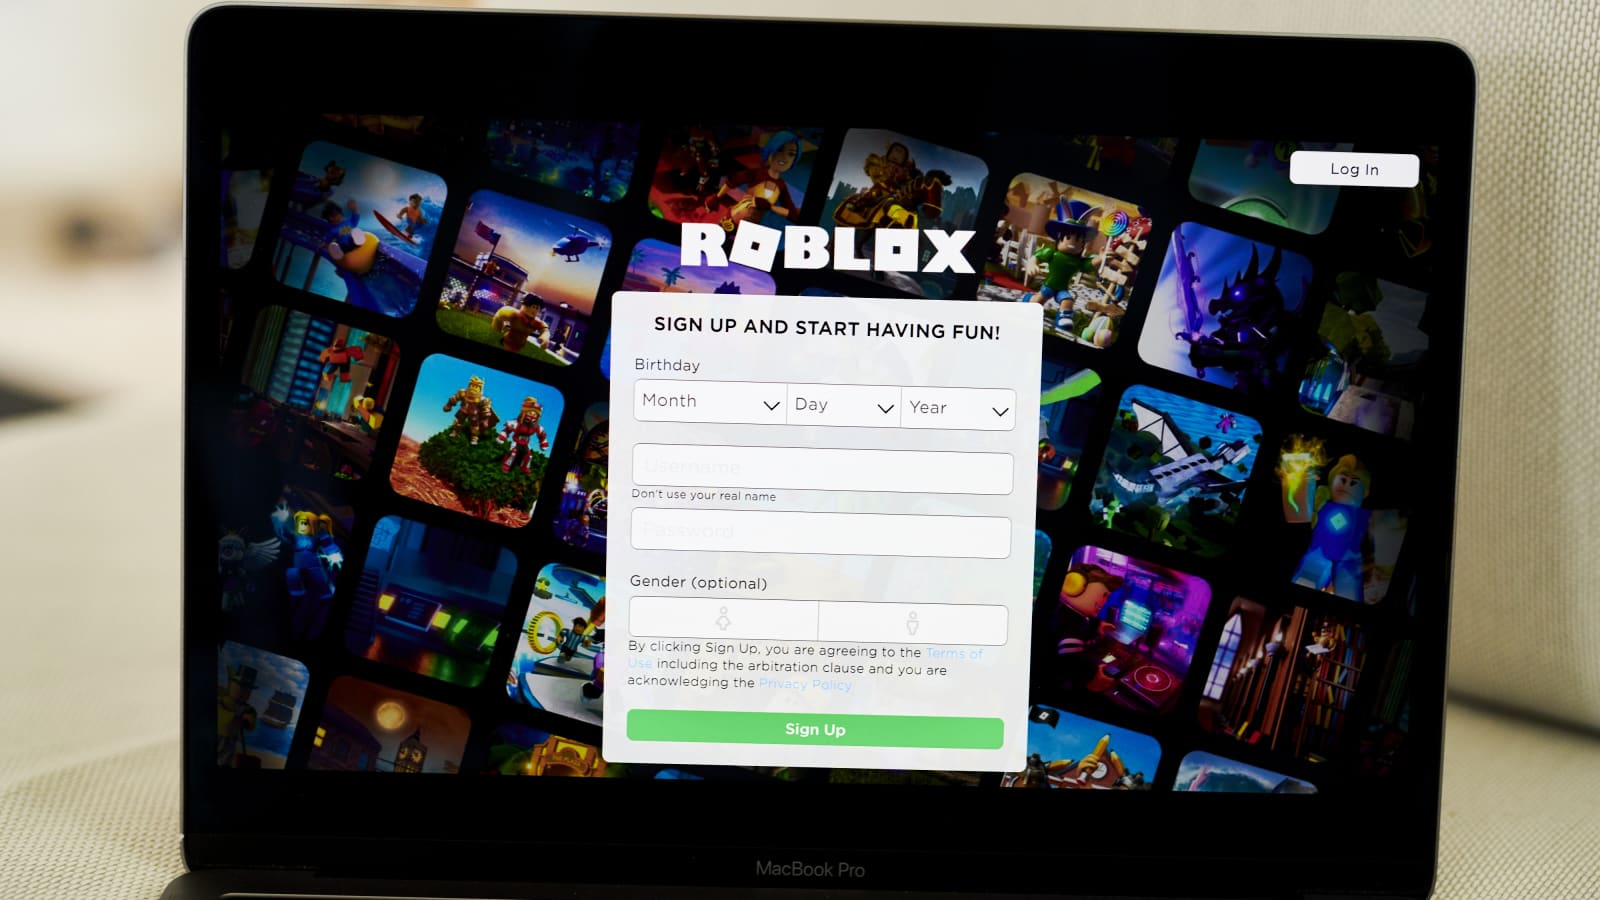 The video game platform Roblox is still down, but the company says